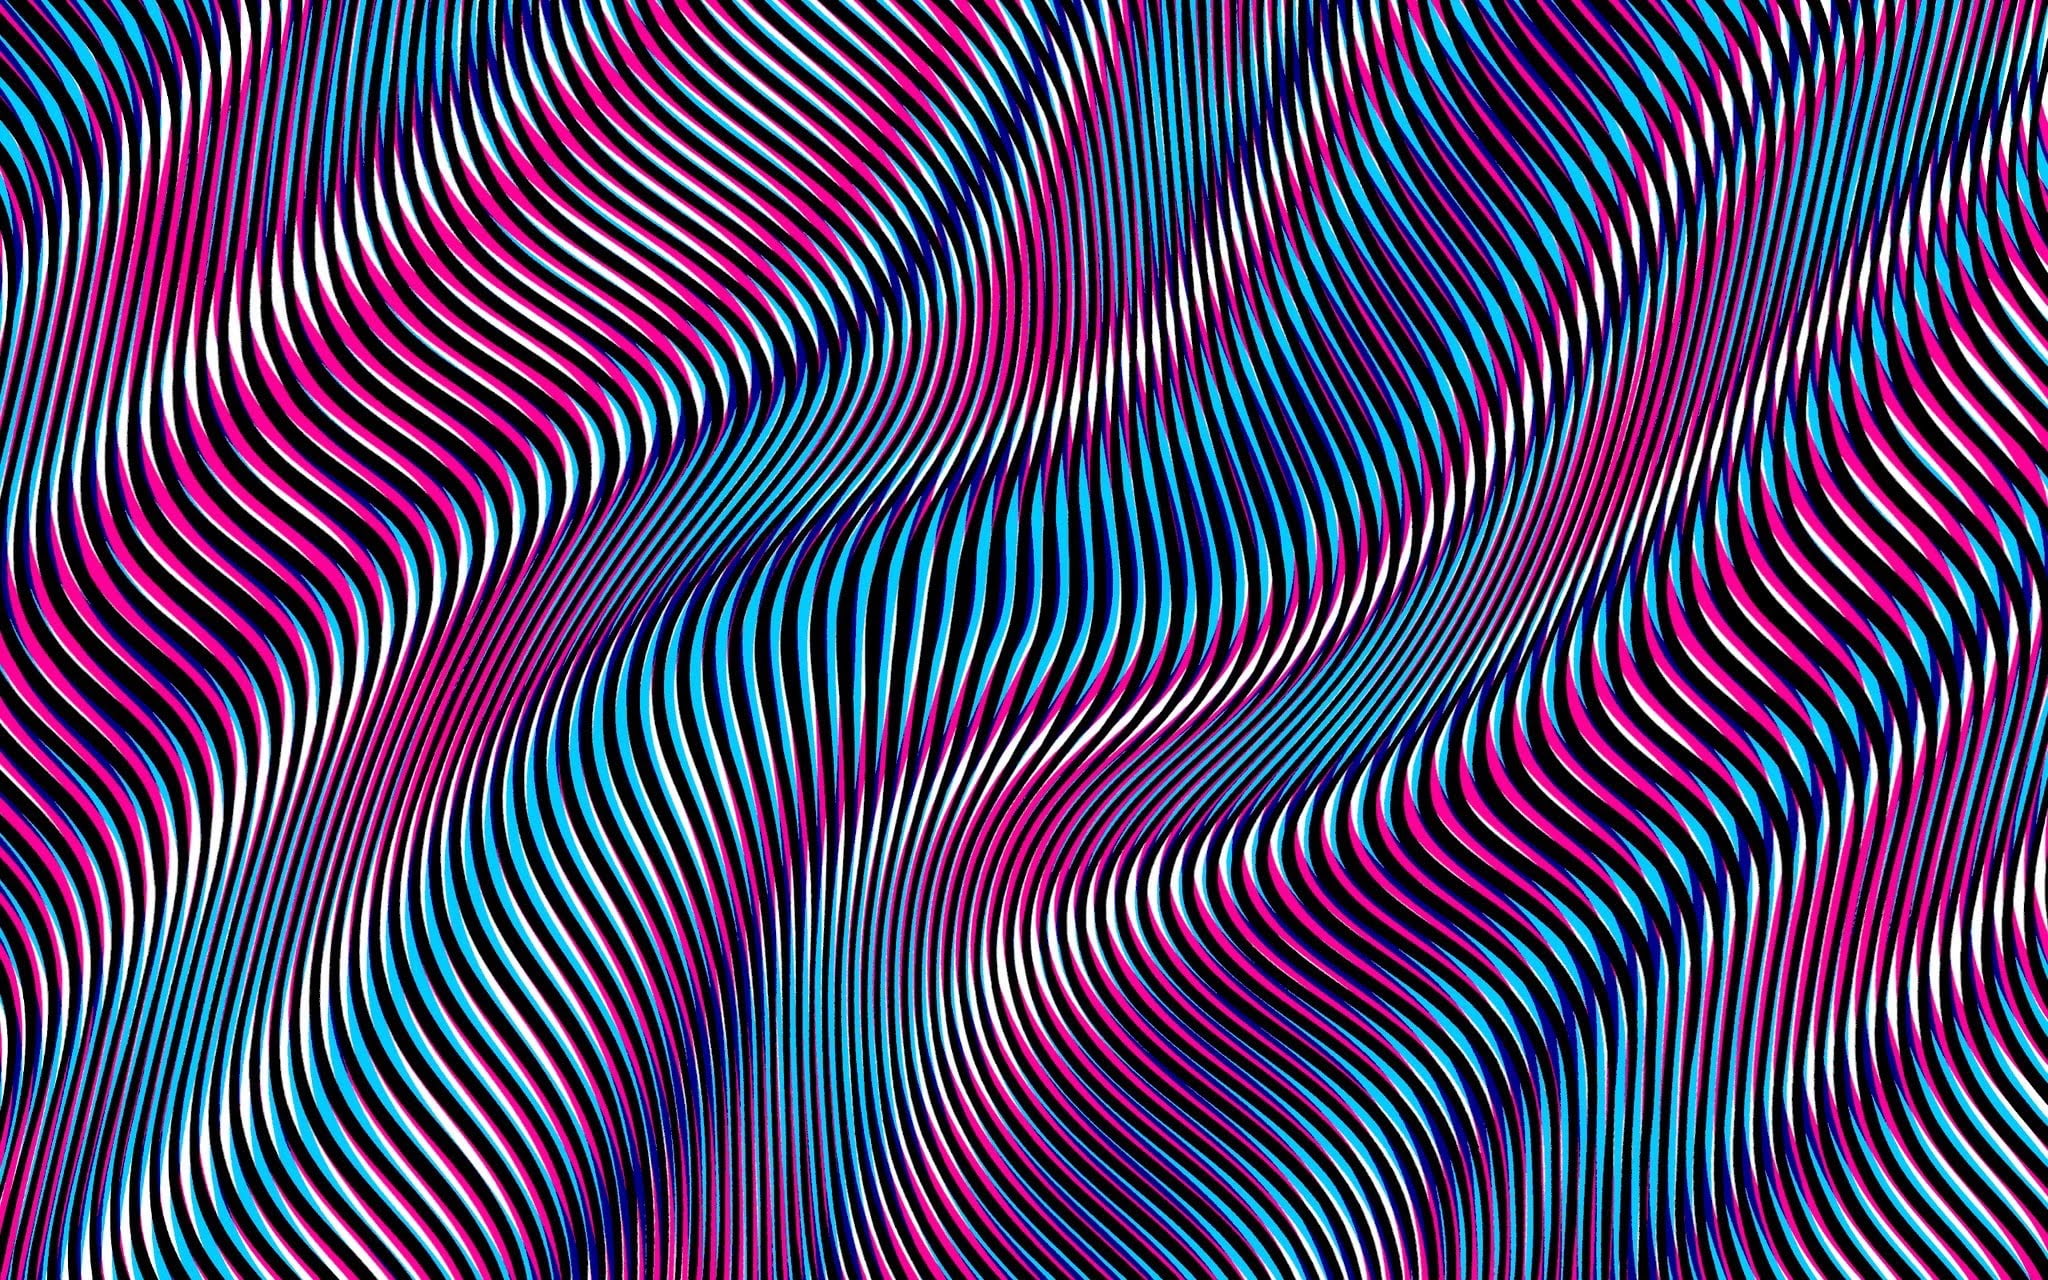 abstract painting, optical illusion, pattern, backgrounds, full frame